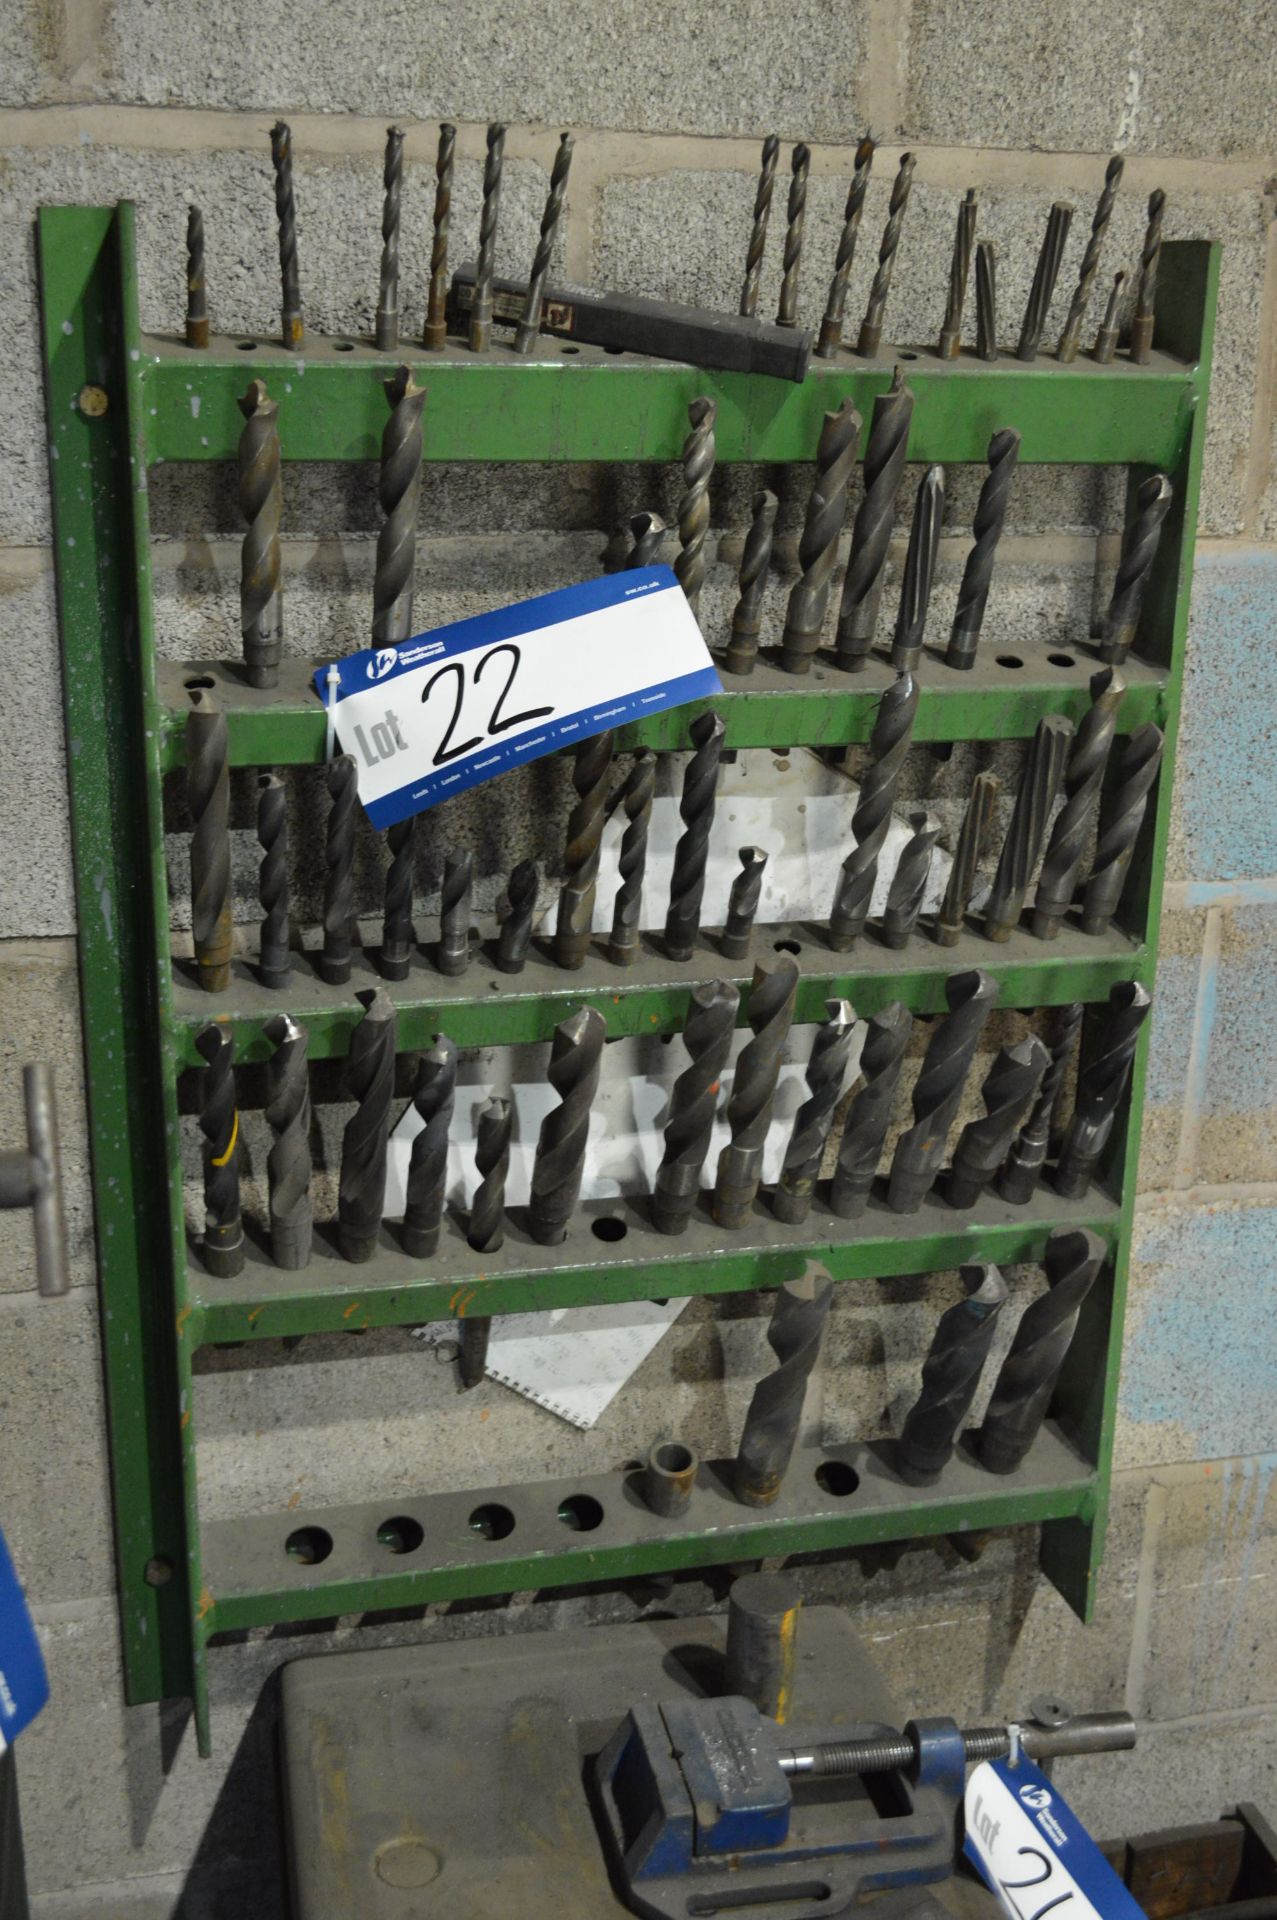 Wall Mounted Drill Rack, with residual MT shank drills - Image 2 of 2